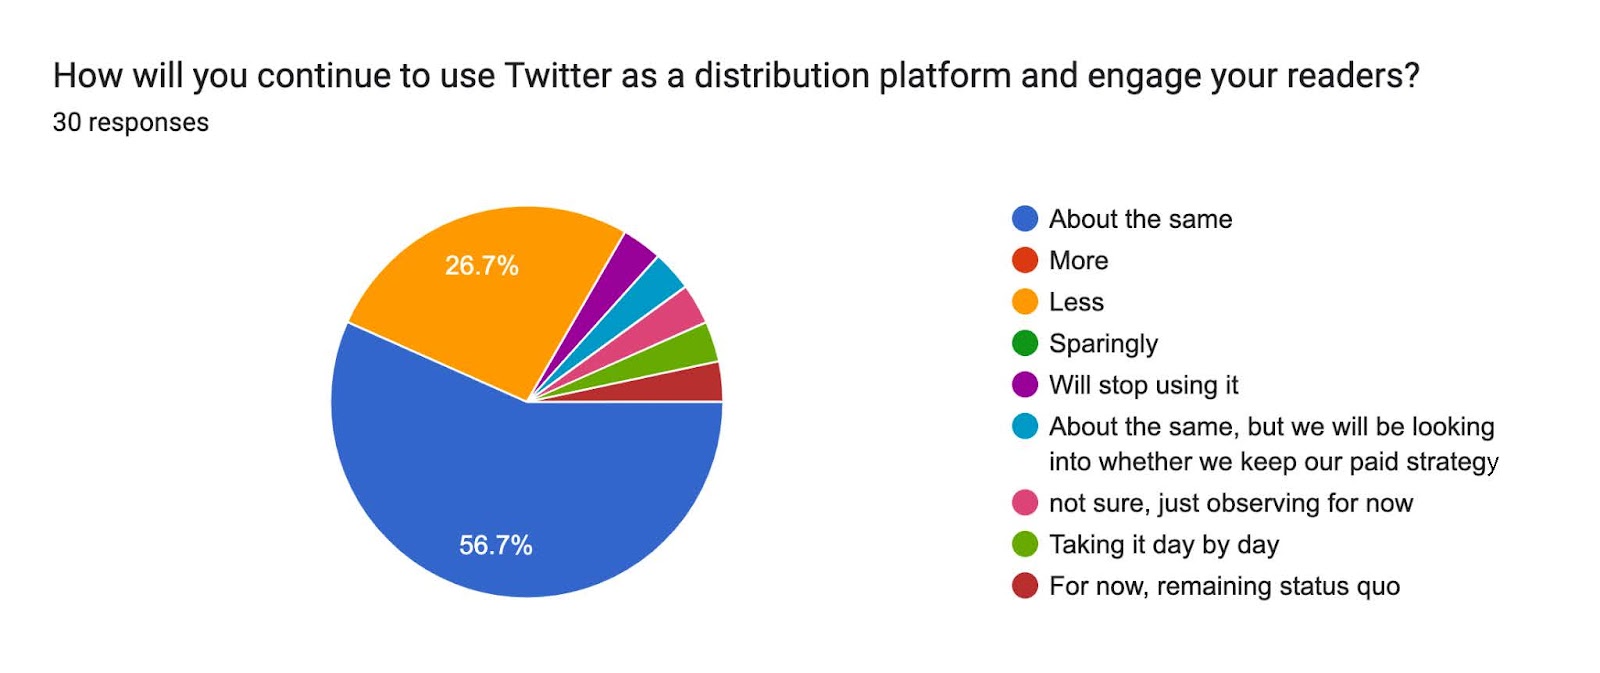 A pie chart showing the results of a survey that asks, "How will you continue to use Twitter as a distribution platform and engage your readers?" The most common response is "About the same" at 56.7%, followed by "Less" with 26.7%.